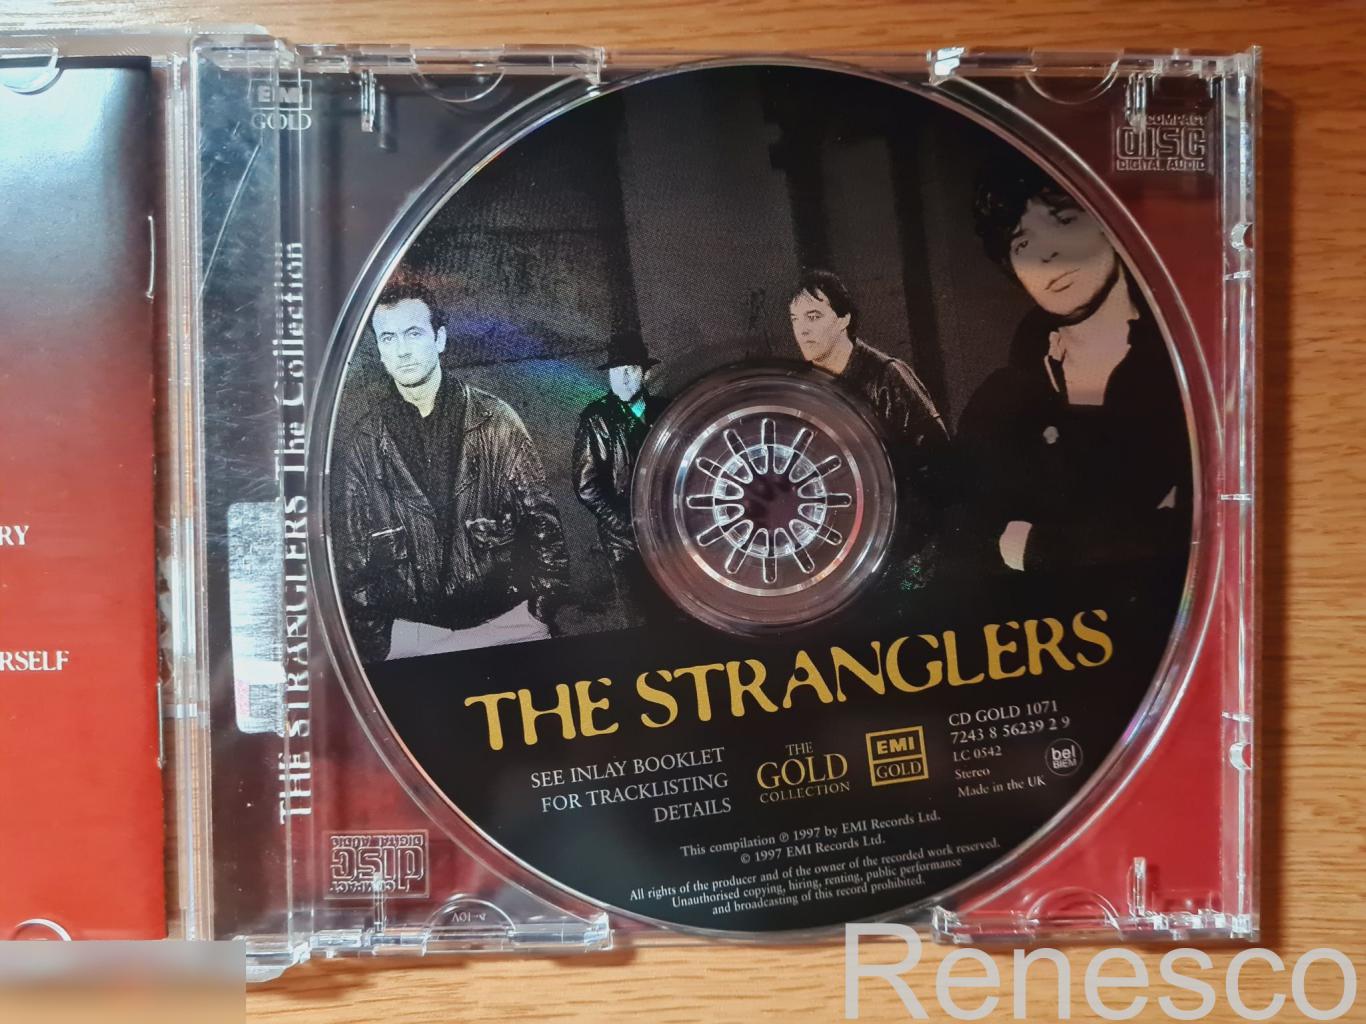 The Stranglers ?– The Collection (Europe) (1997) 4